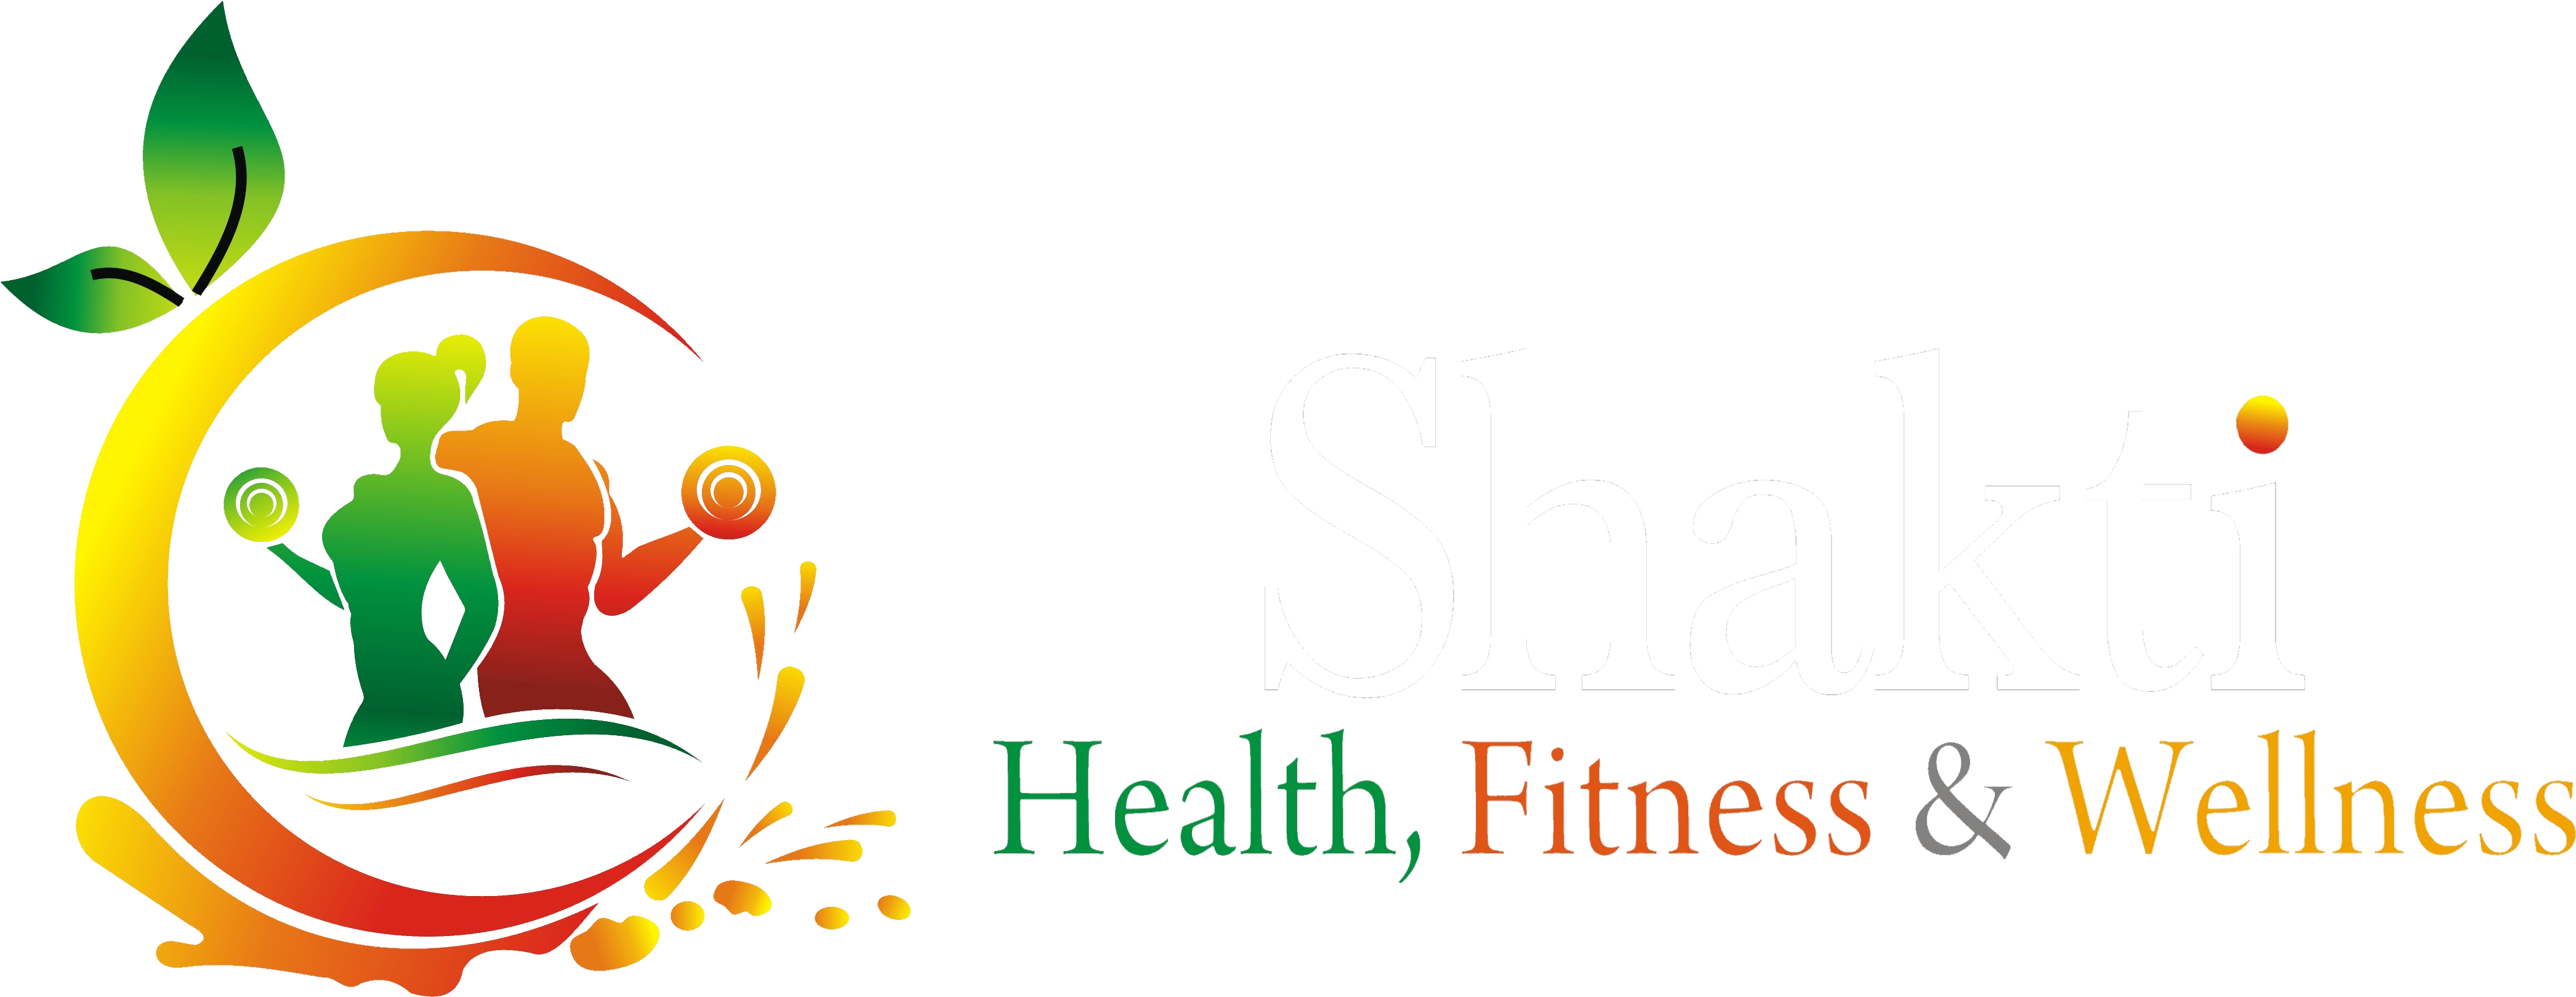 Health Png 4184 X 1619